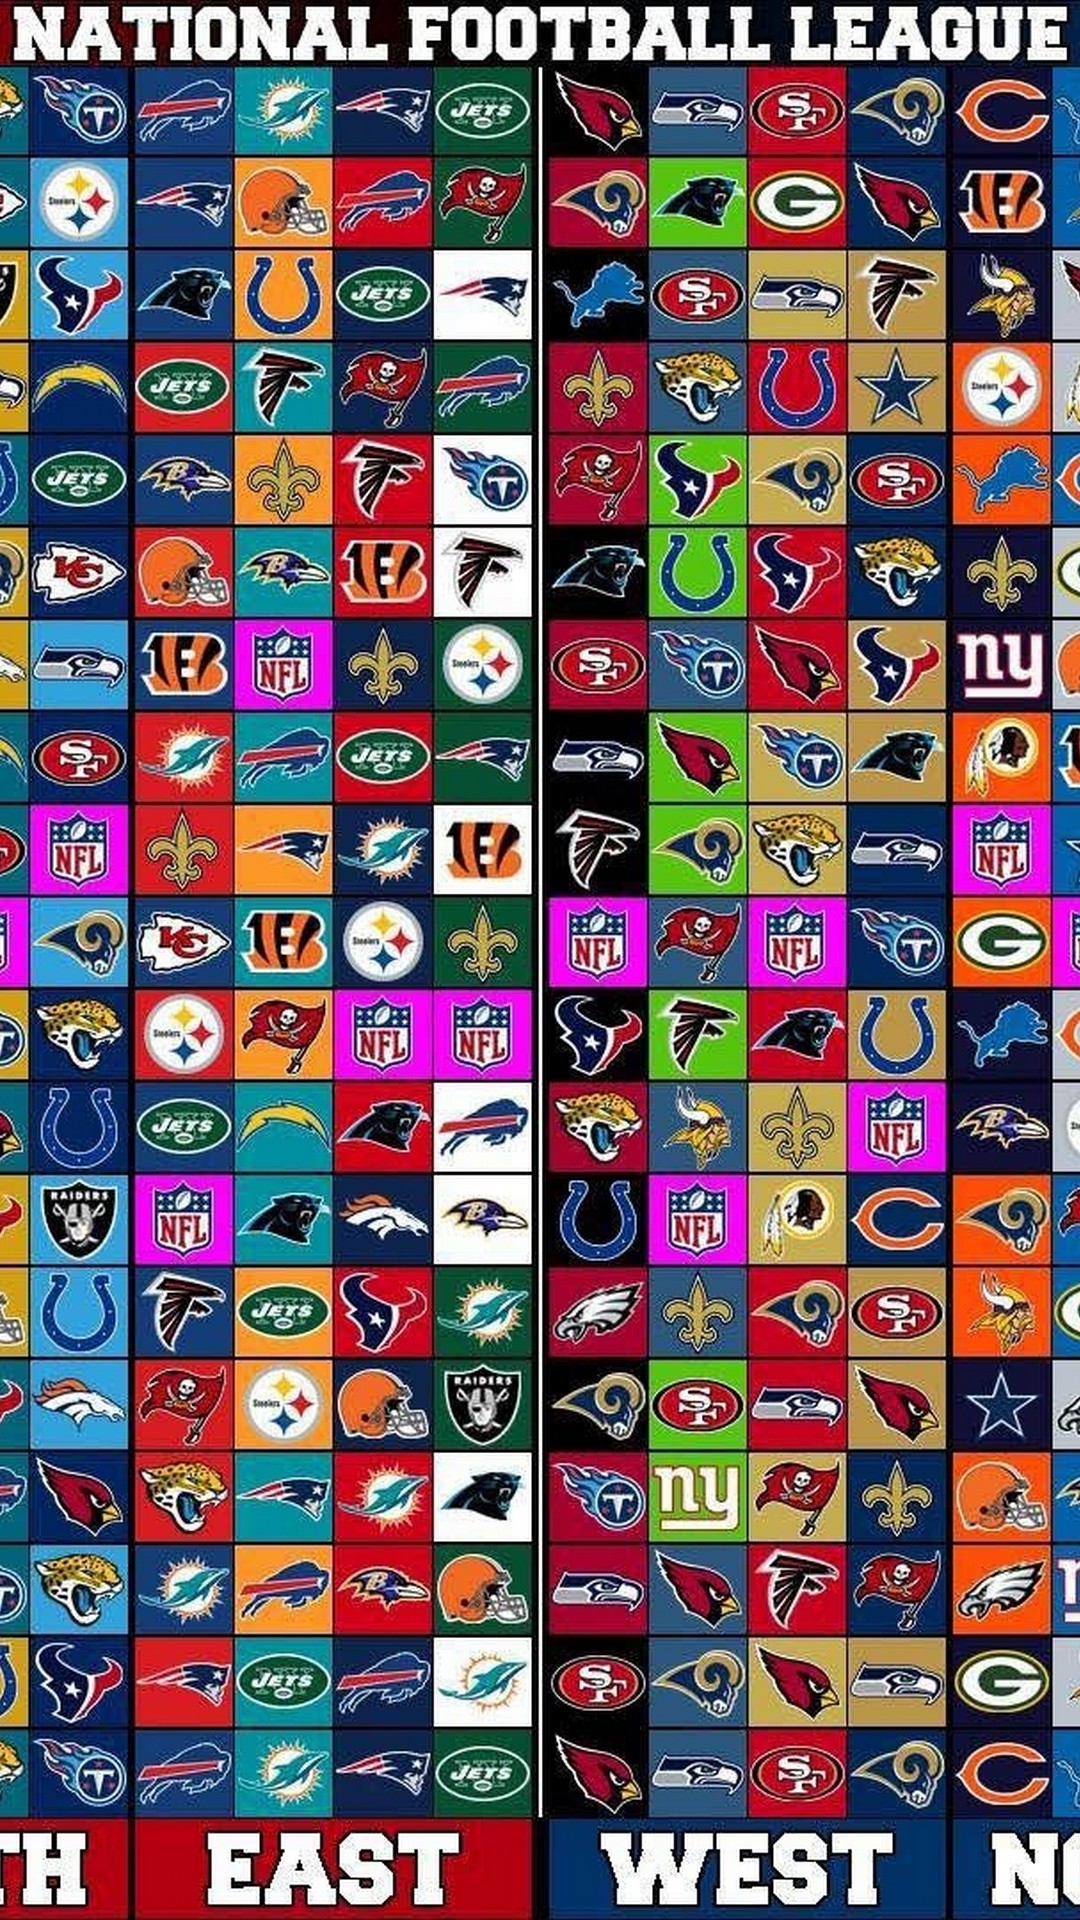 NFL iPhone Wallpaper in HD With high-resolution 1080X1920 pixel. Download and set as wallpaper for Apple iPhone X, XS Max, XR, 8, 7, 6, SE, iPad, Android